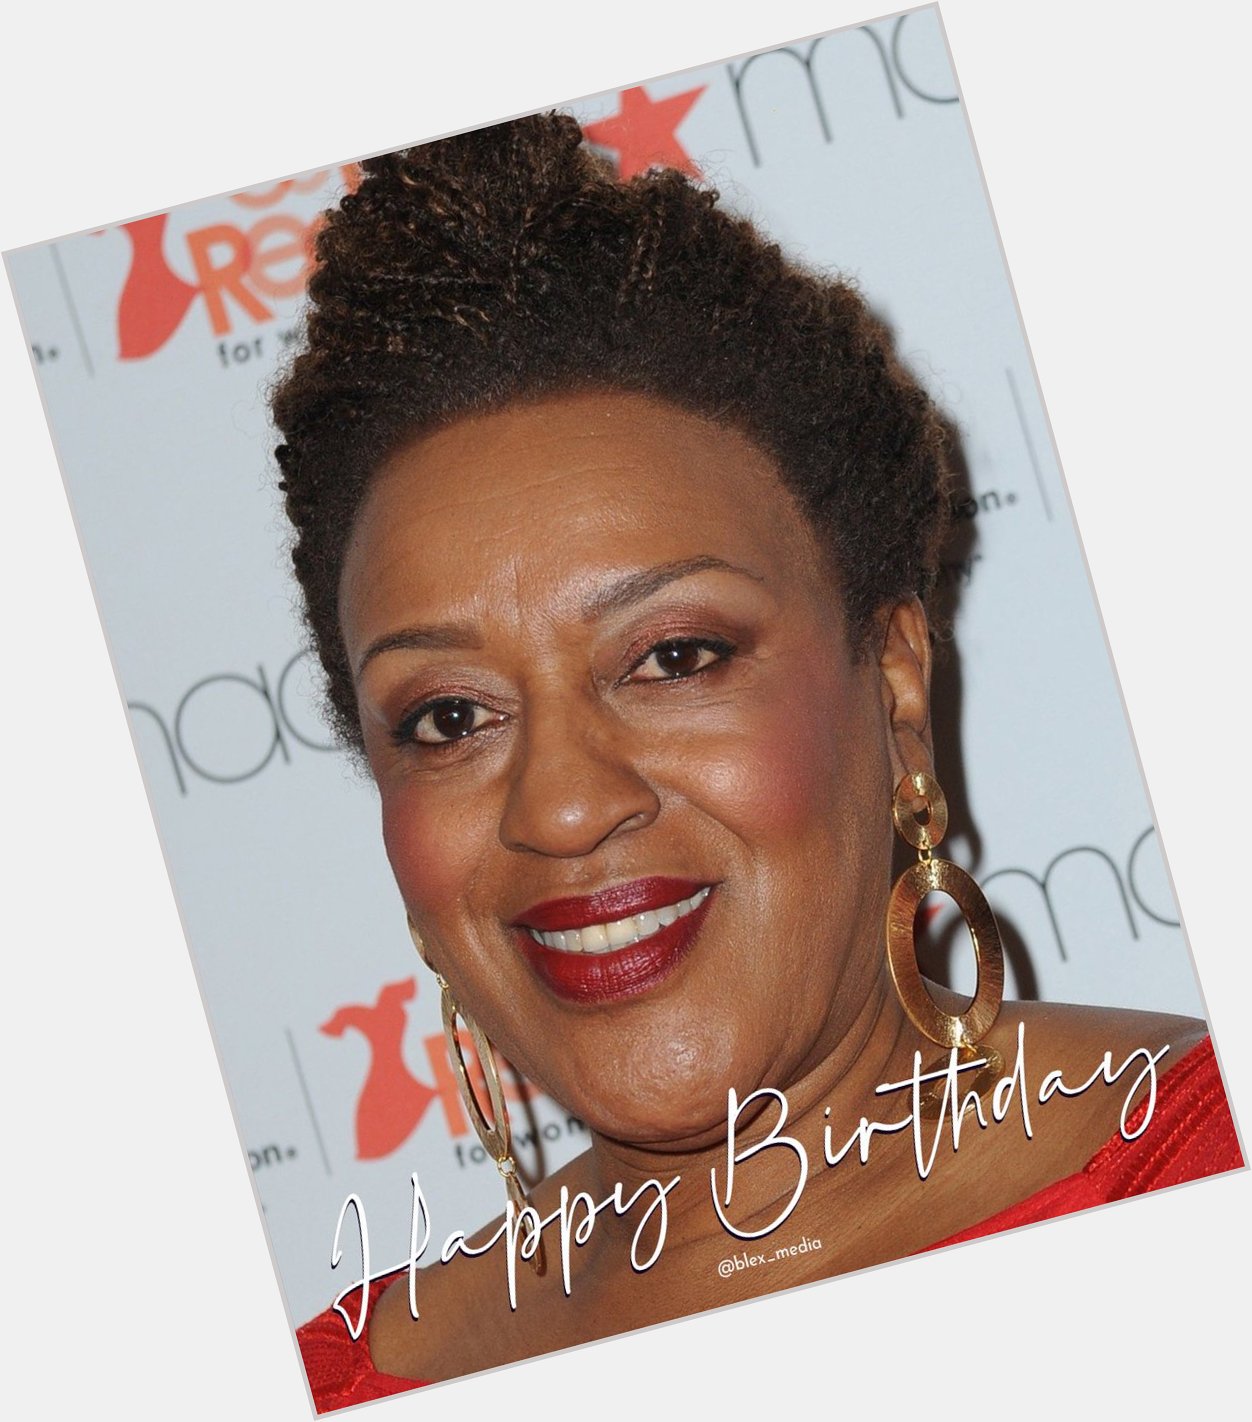 Happy Birthday CCH Pounder. She is such a great actress and deserving of all the flowers! 